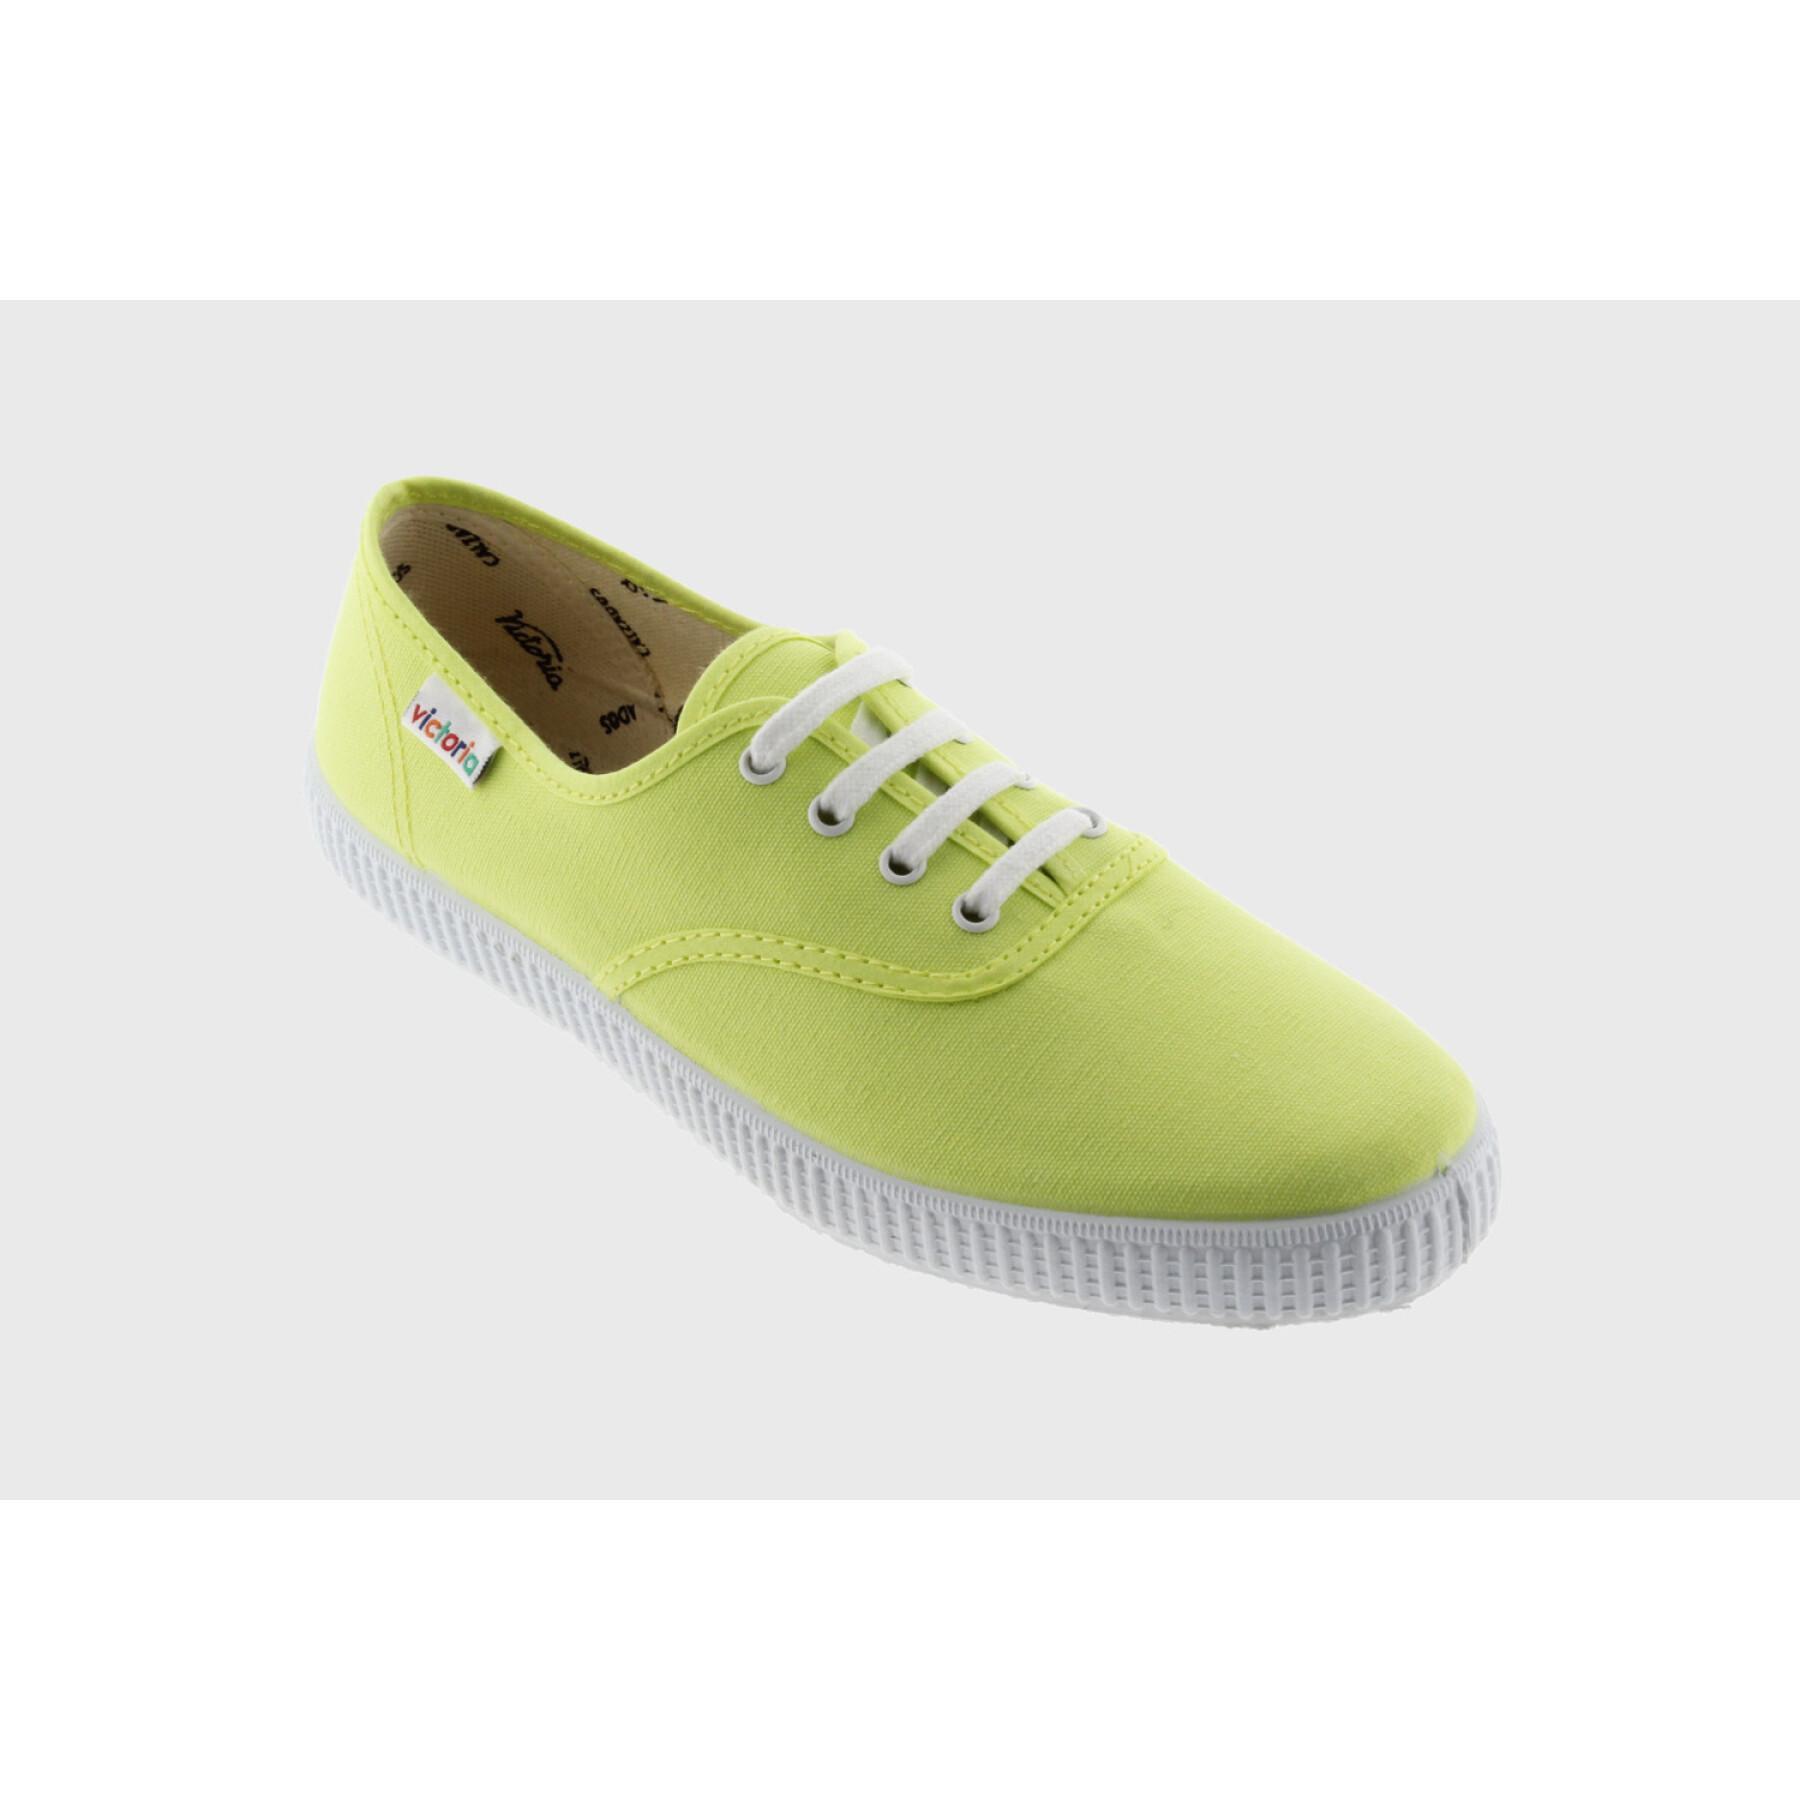 Women's sneakers Victoria 1915 anglaise